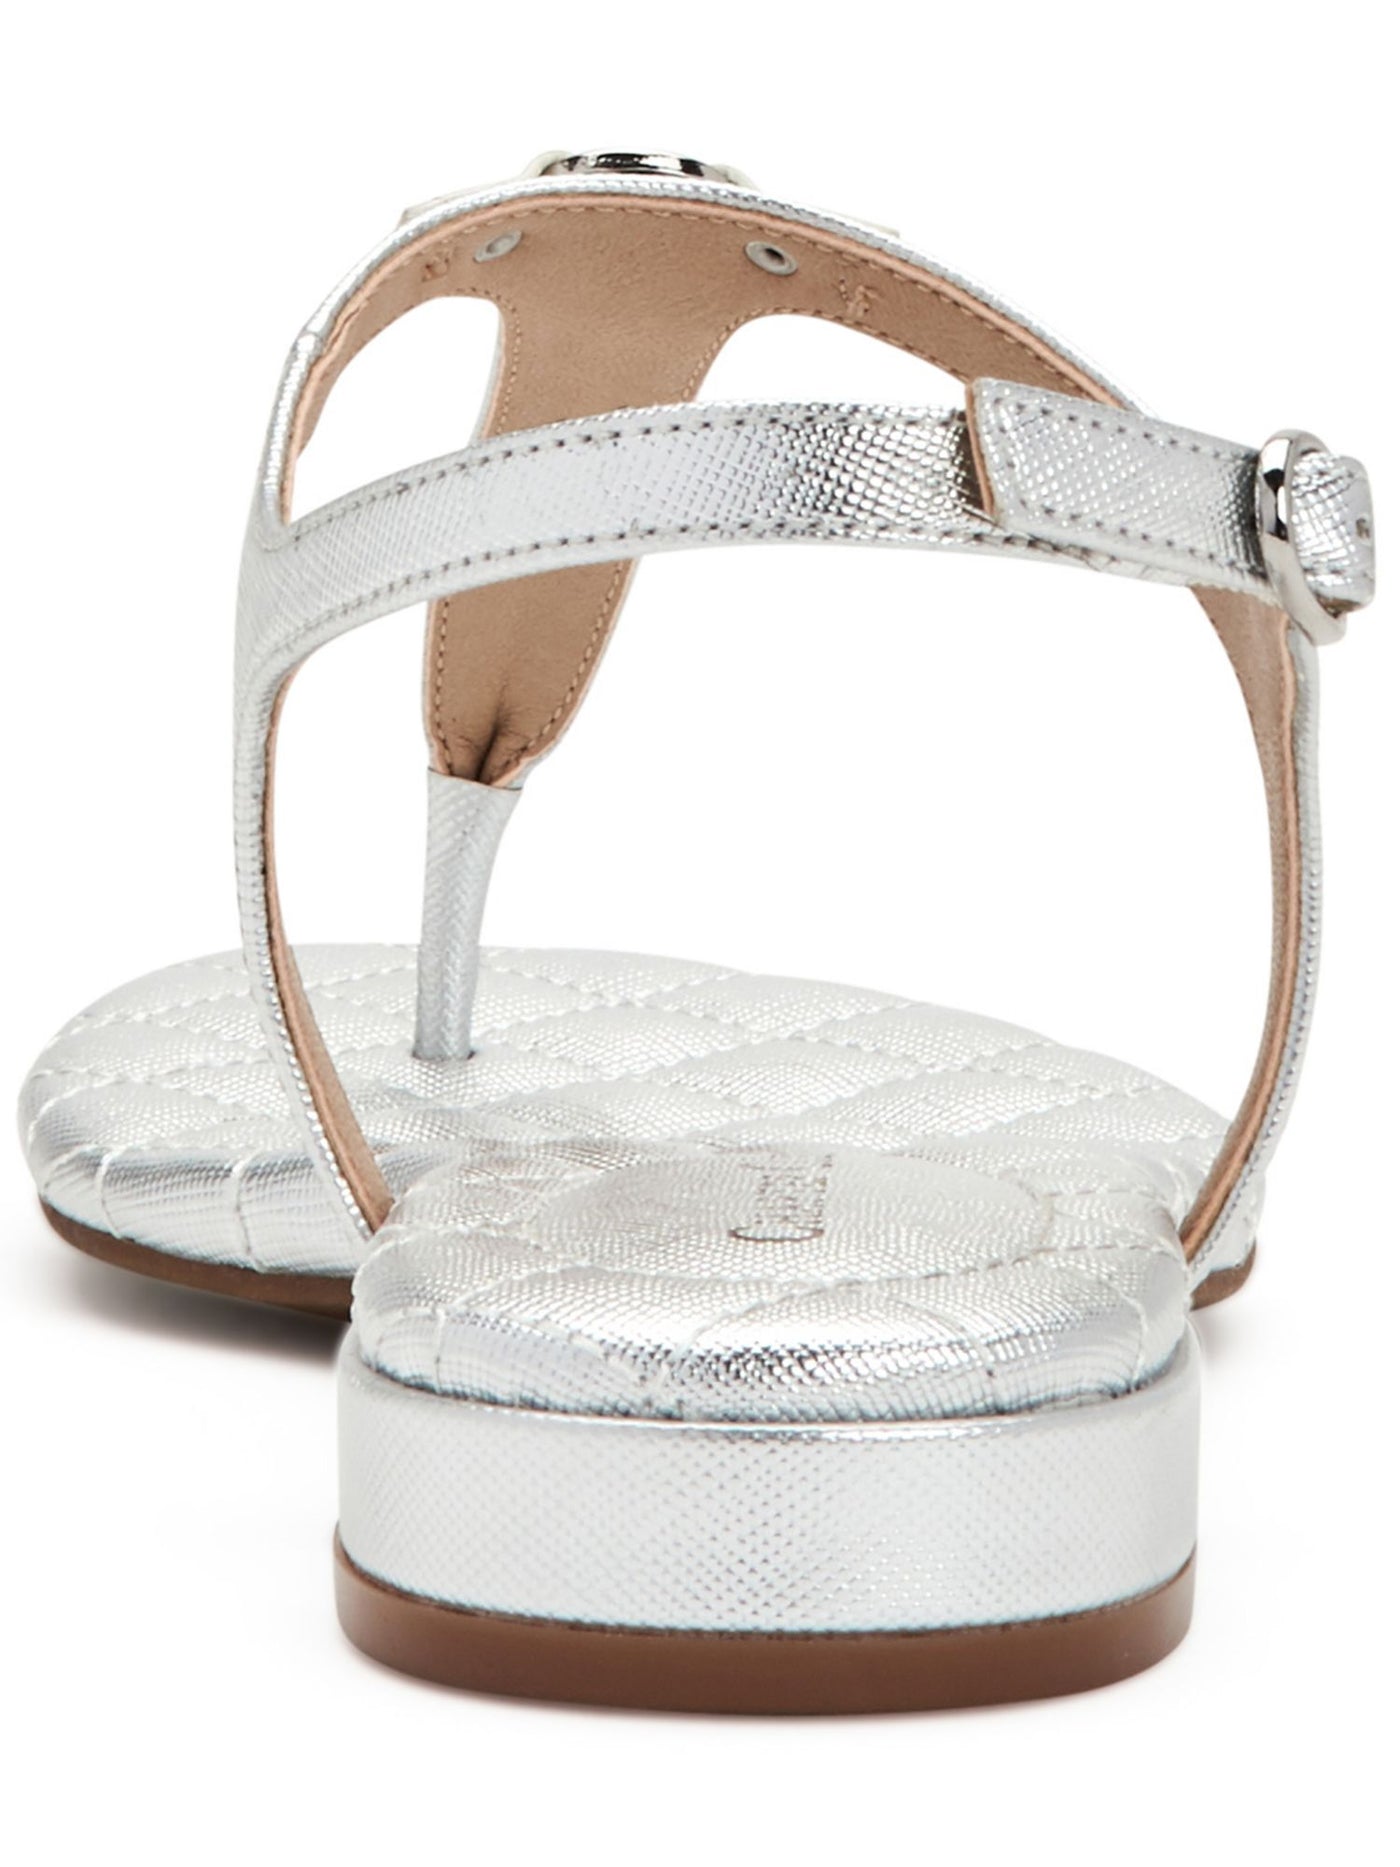 CHARTER CLUB Womens Silver Quilted Padded Carinna Round Toe Block Heel Buckle Thong Sandals Shoes 10 M